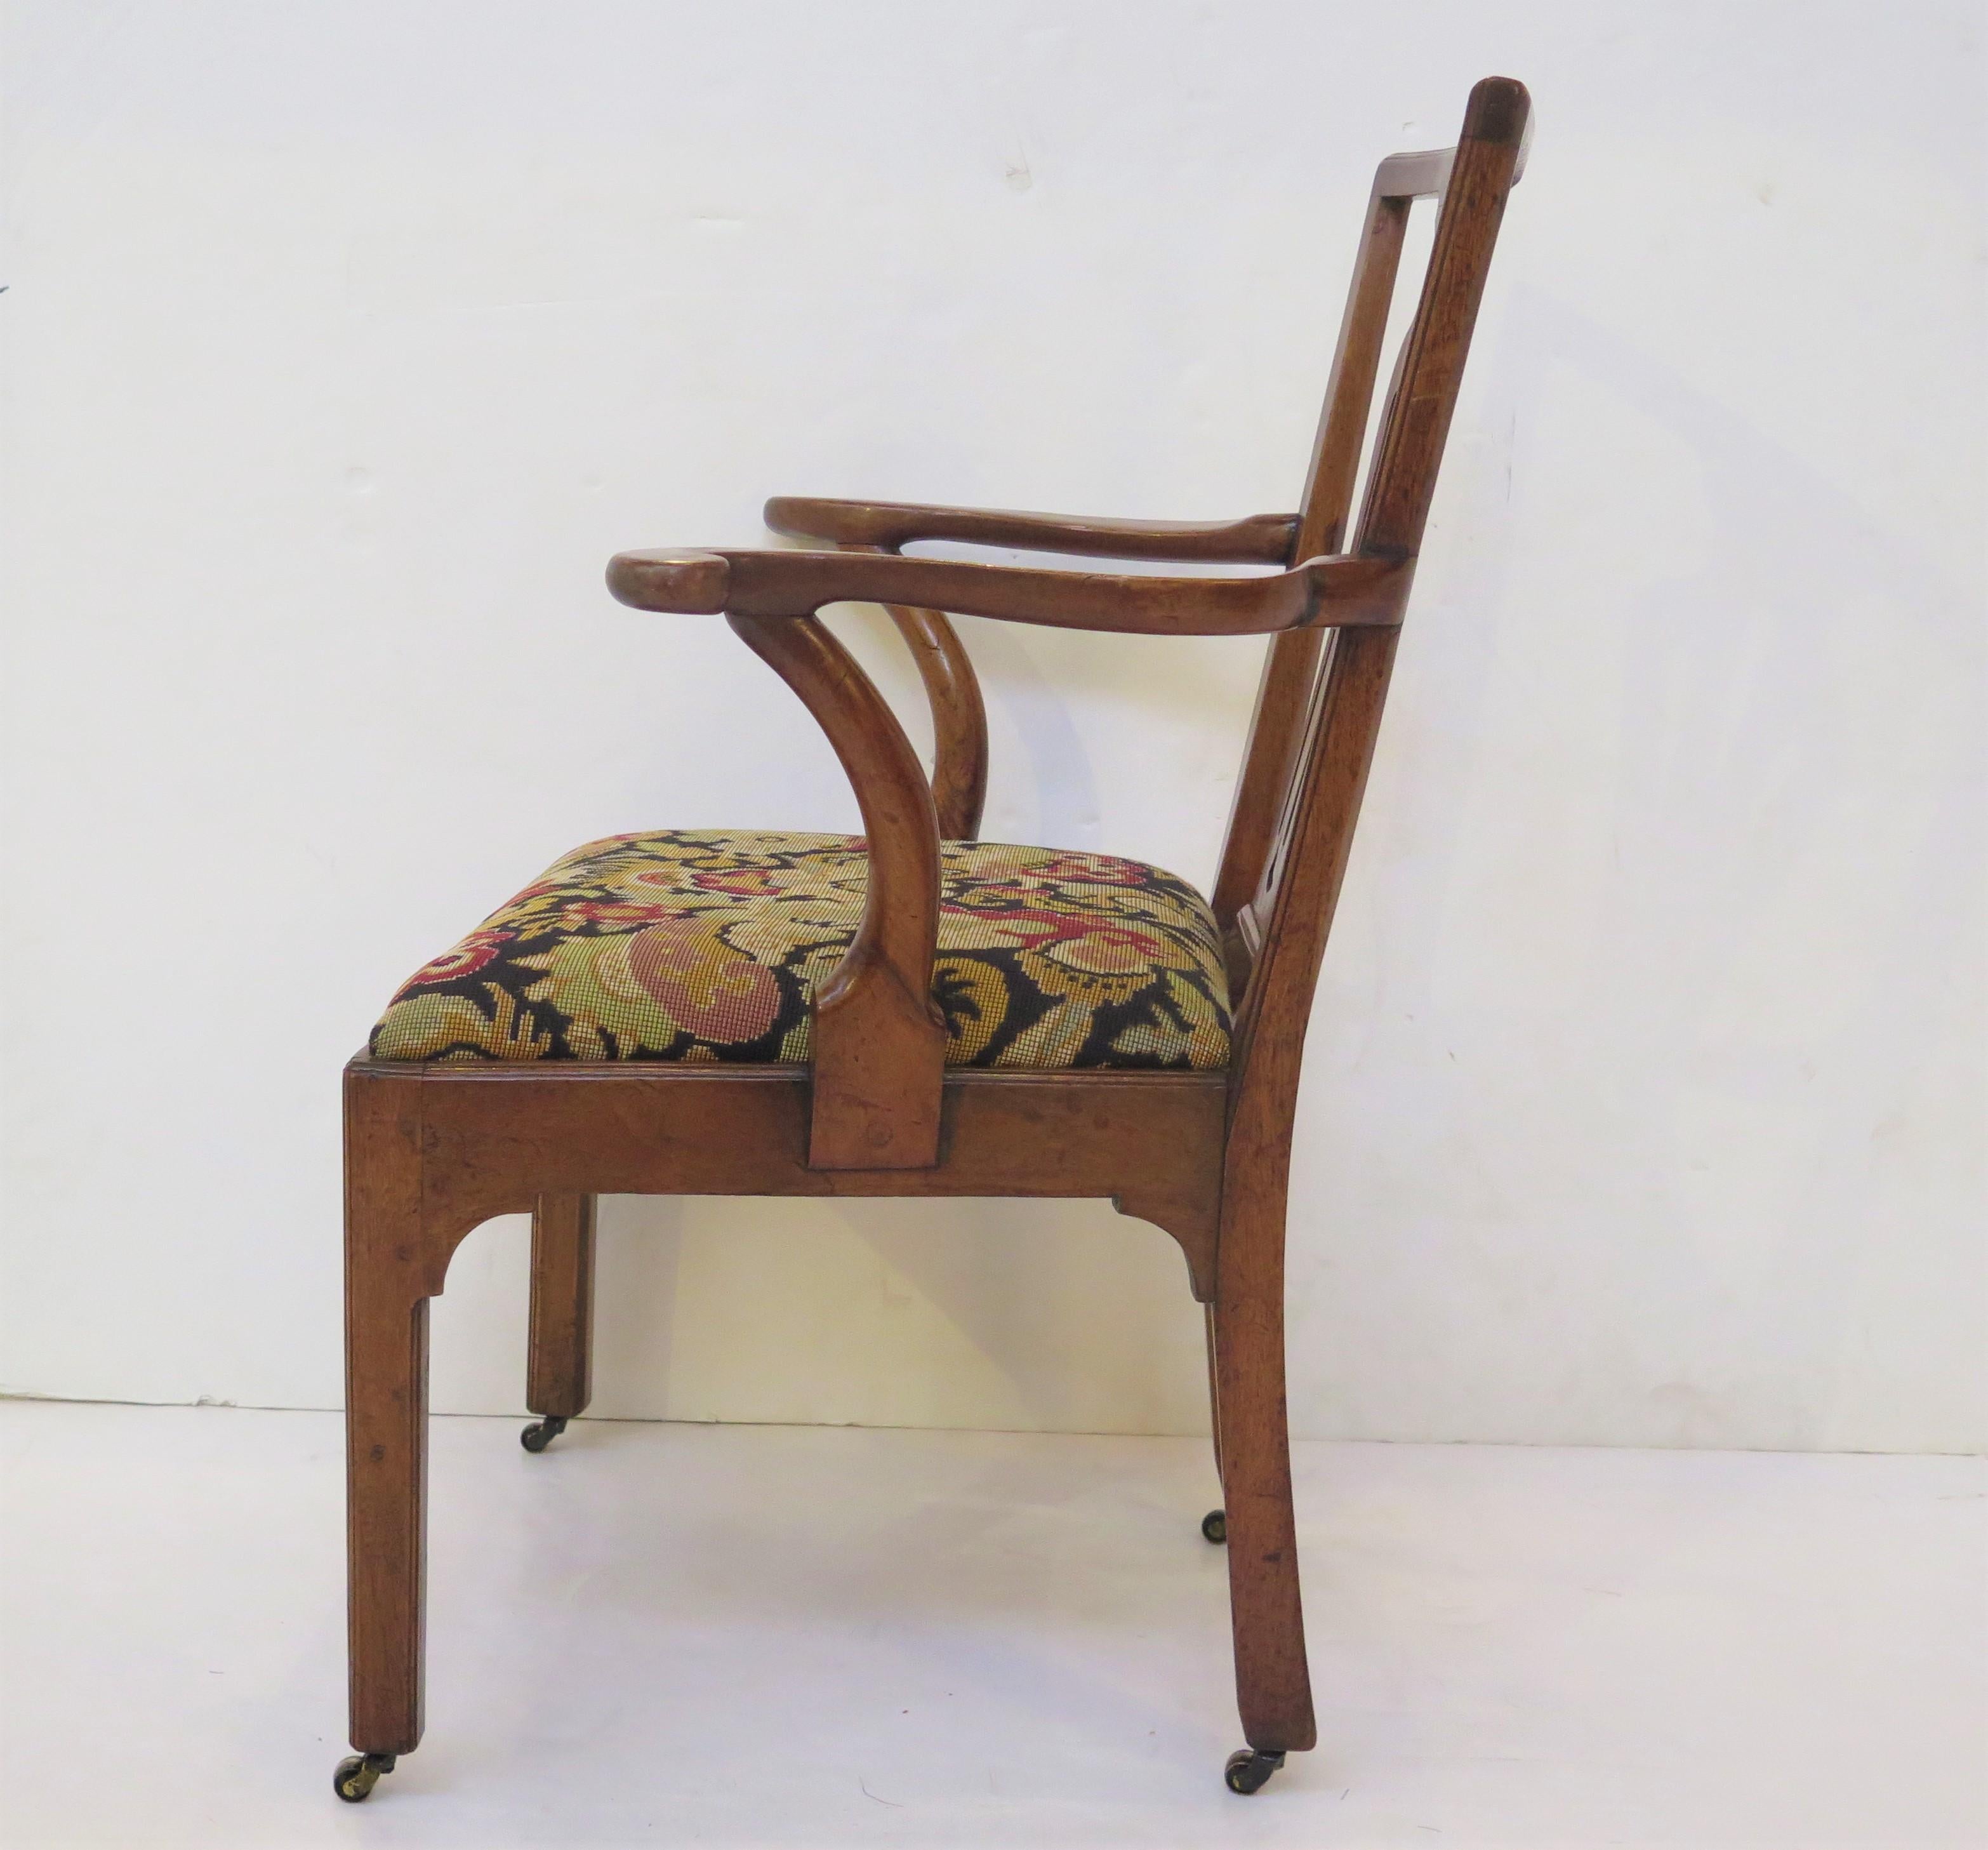 English Handsome Georgian Armchair / Desk Chair of Walnut with Needlework Seat For Sale